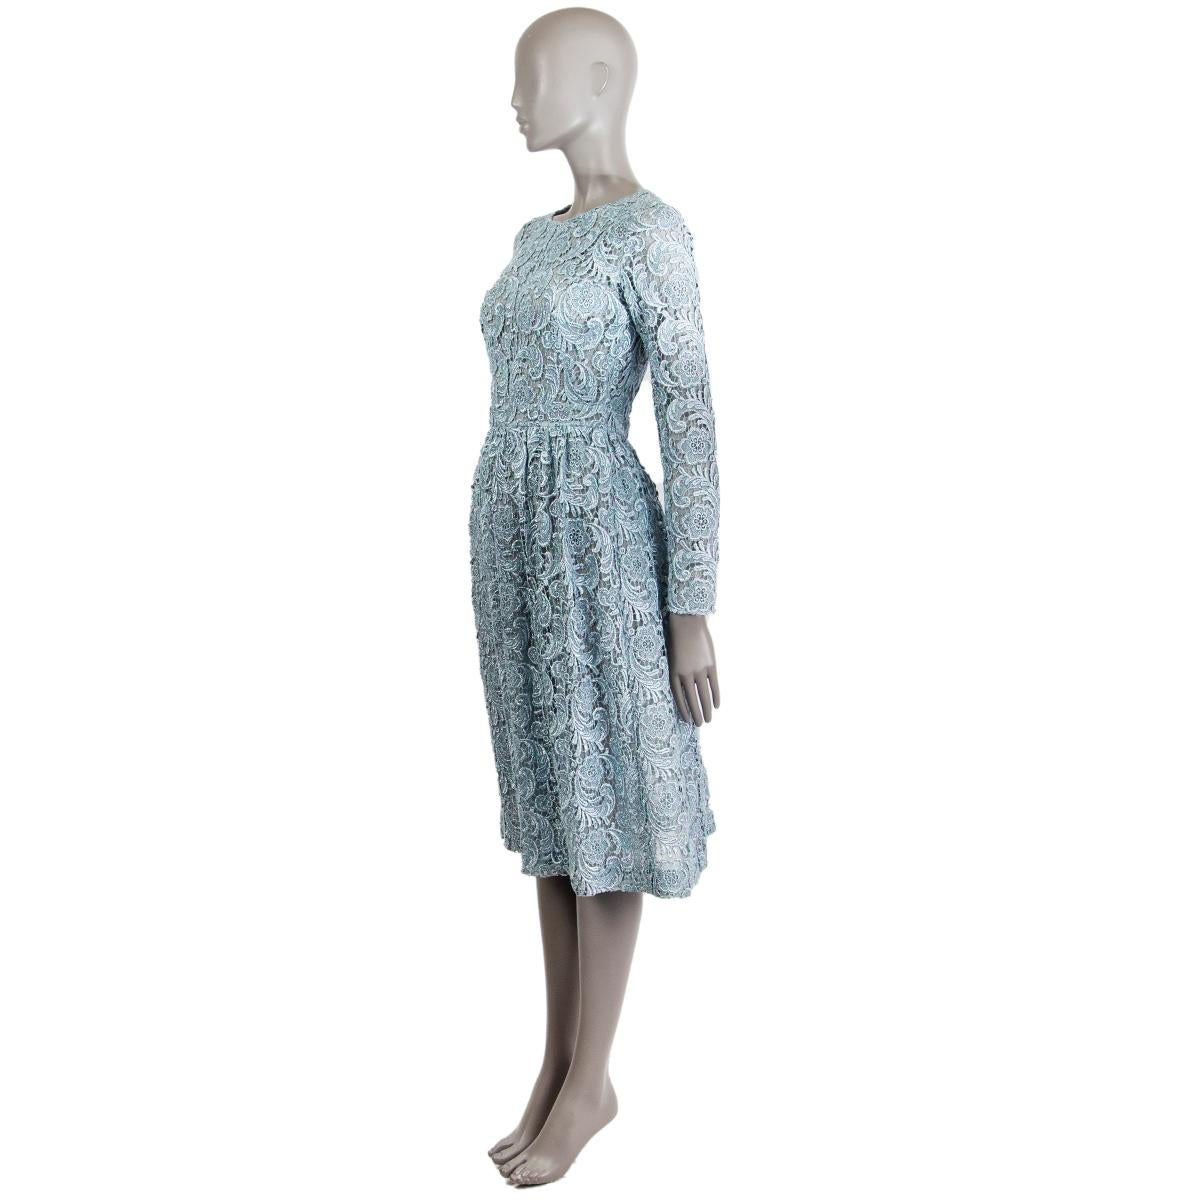 Prada long sleeve empire waist embroidered dress in ice blue viscose (60%), metal (30%) and polyester (10%) with a round neck. Closes on the back with a zipper. Lined and dress is semi-sheer. Has been worn and is in excellent condition. 

Tag Size